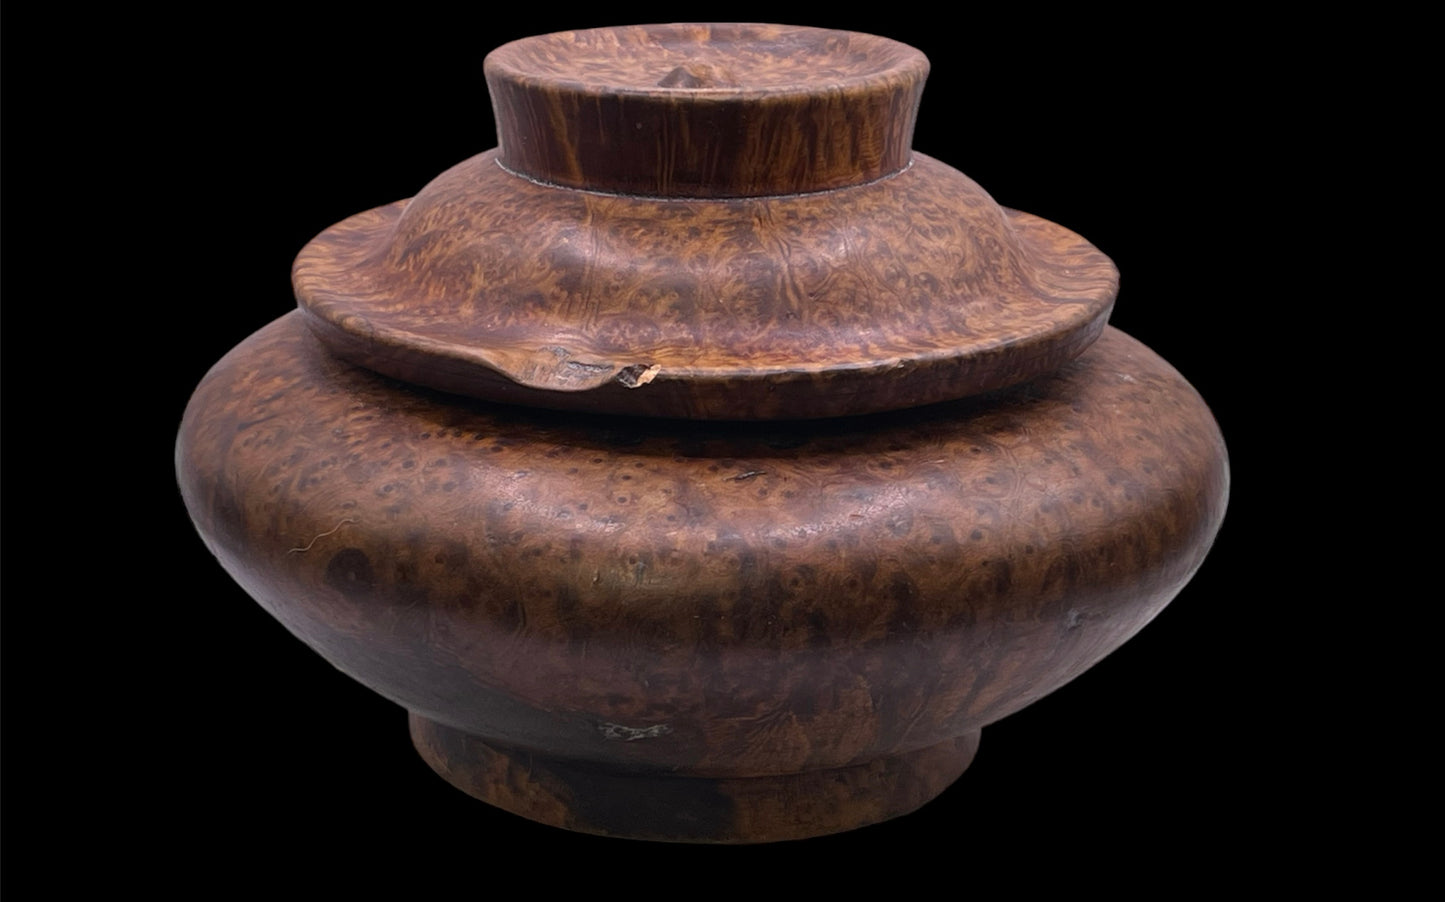 An antique burlwood tsampa container with lid